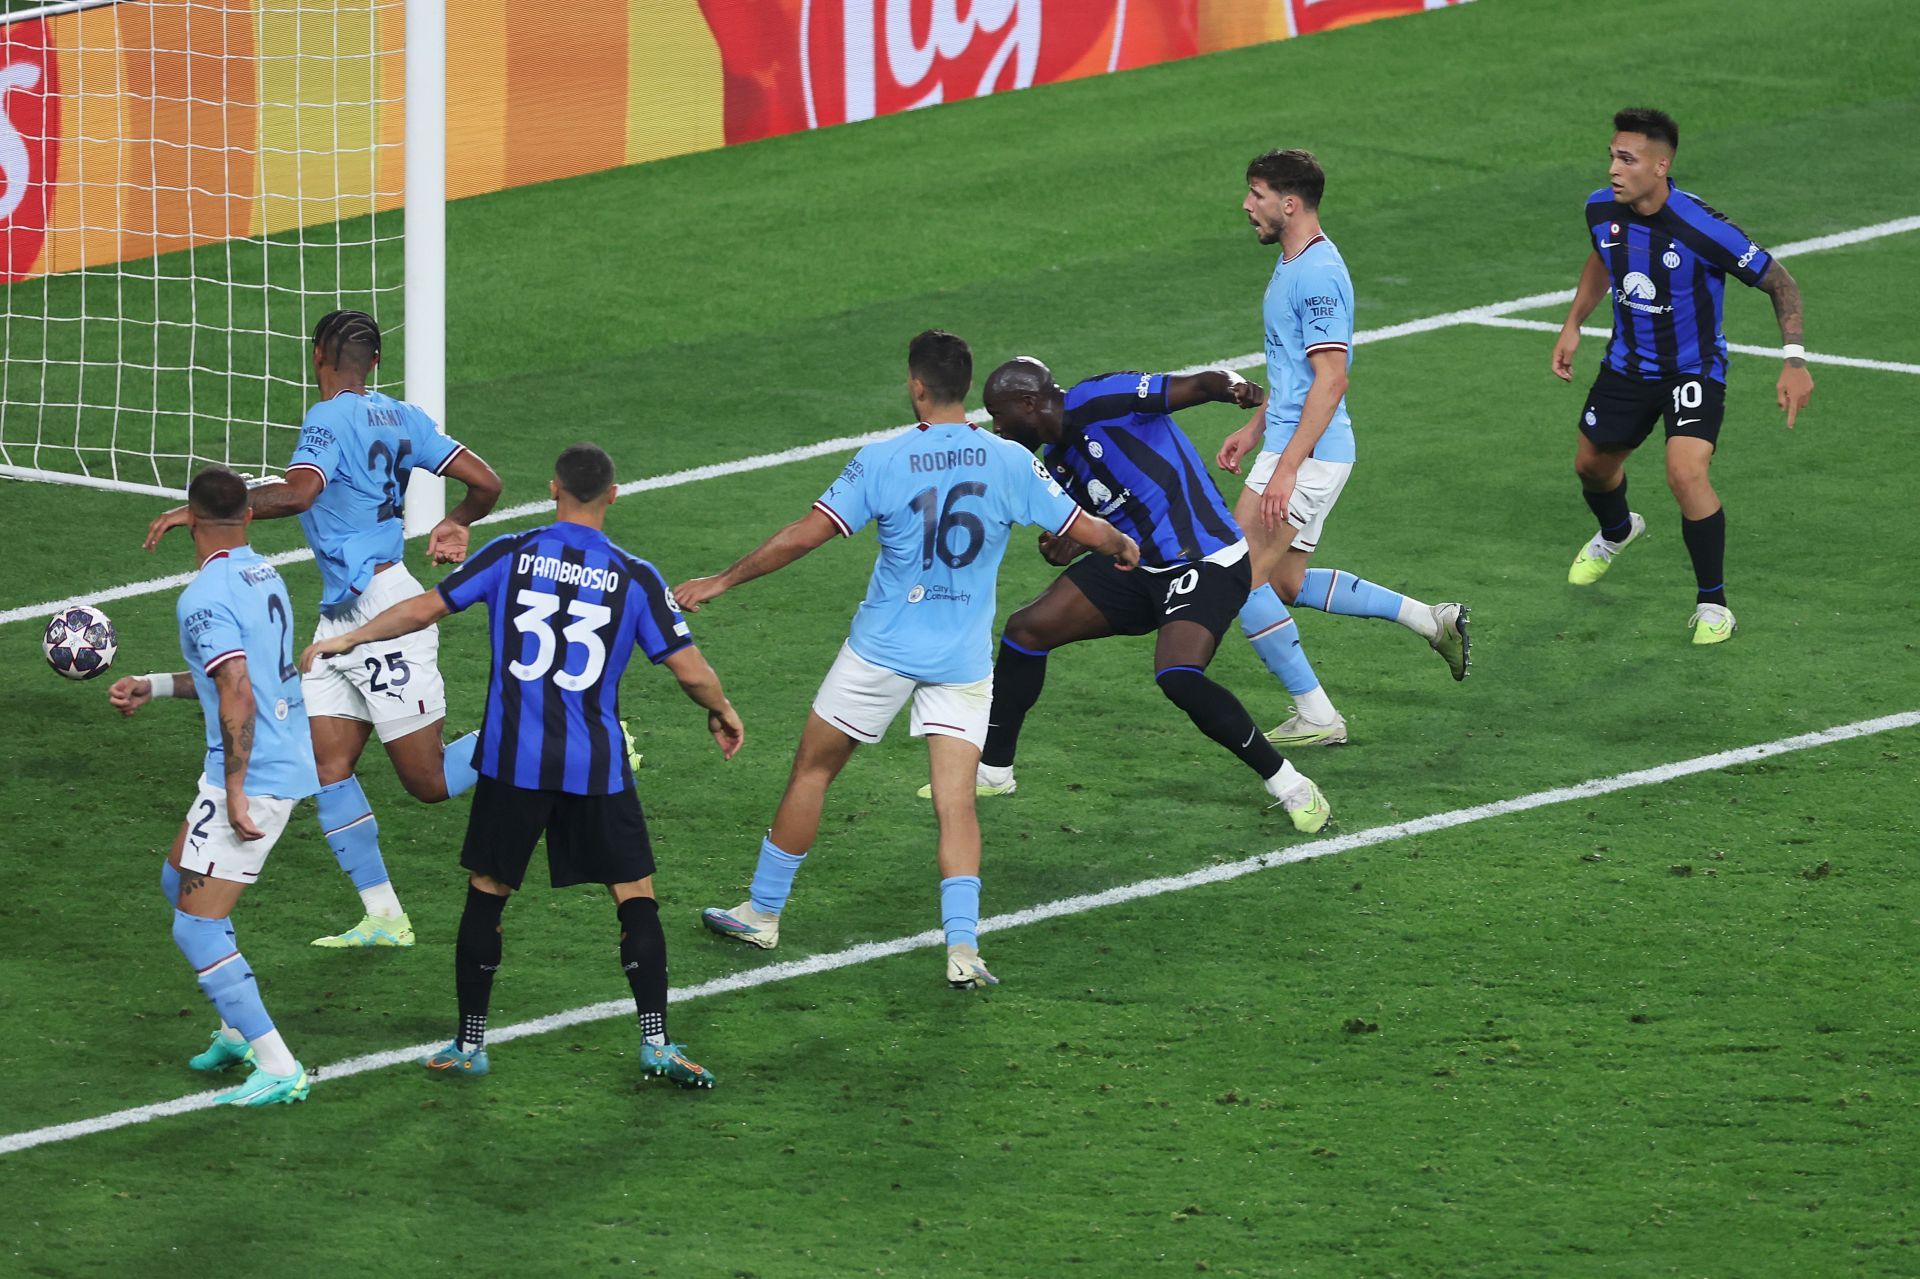 The Belgian (second right) missed a clear header.